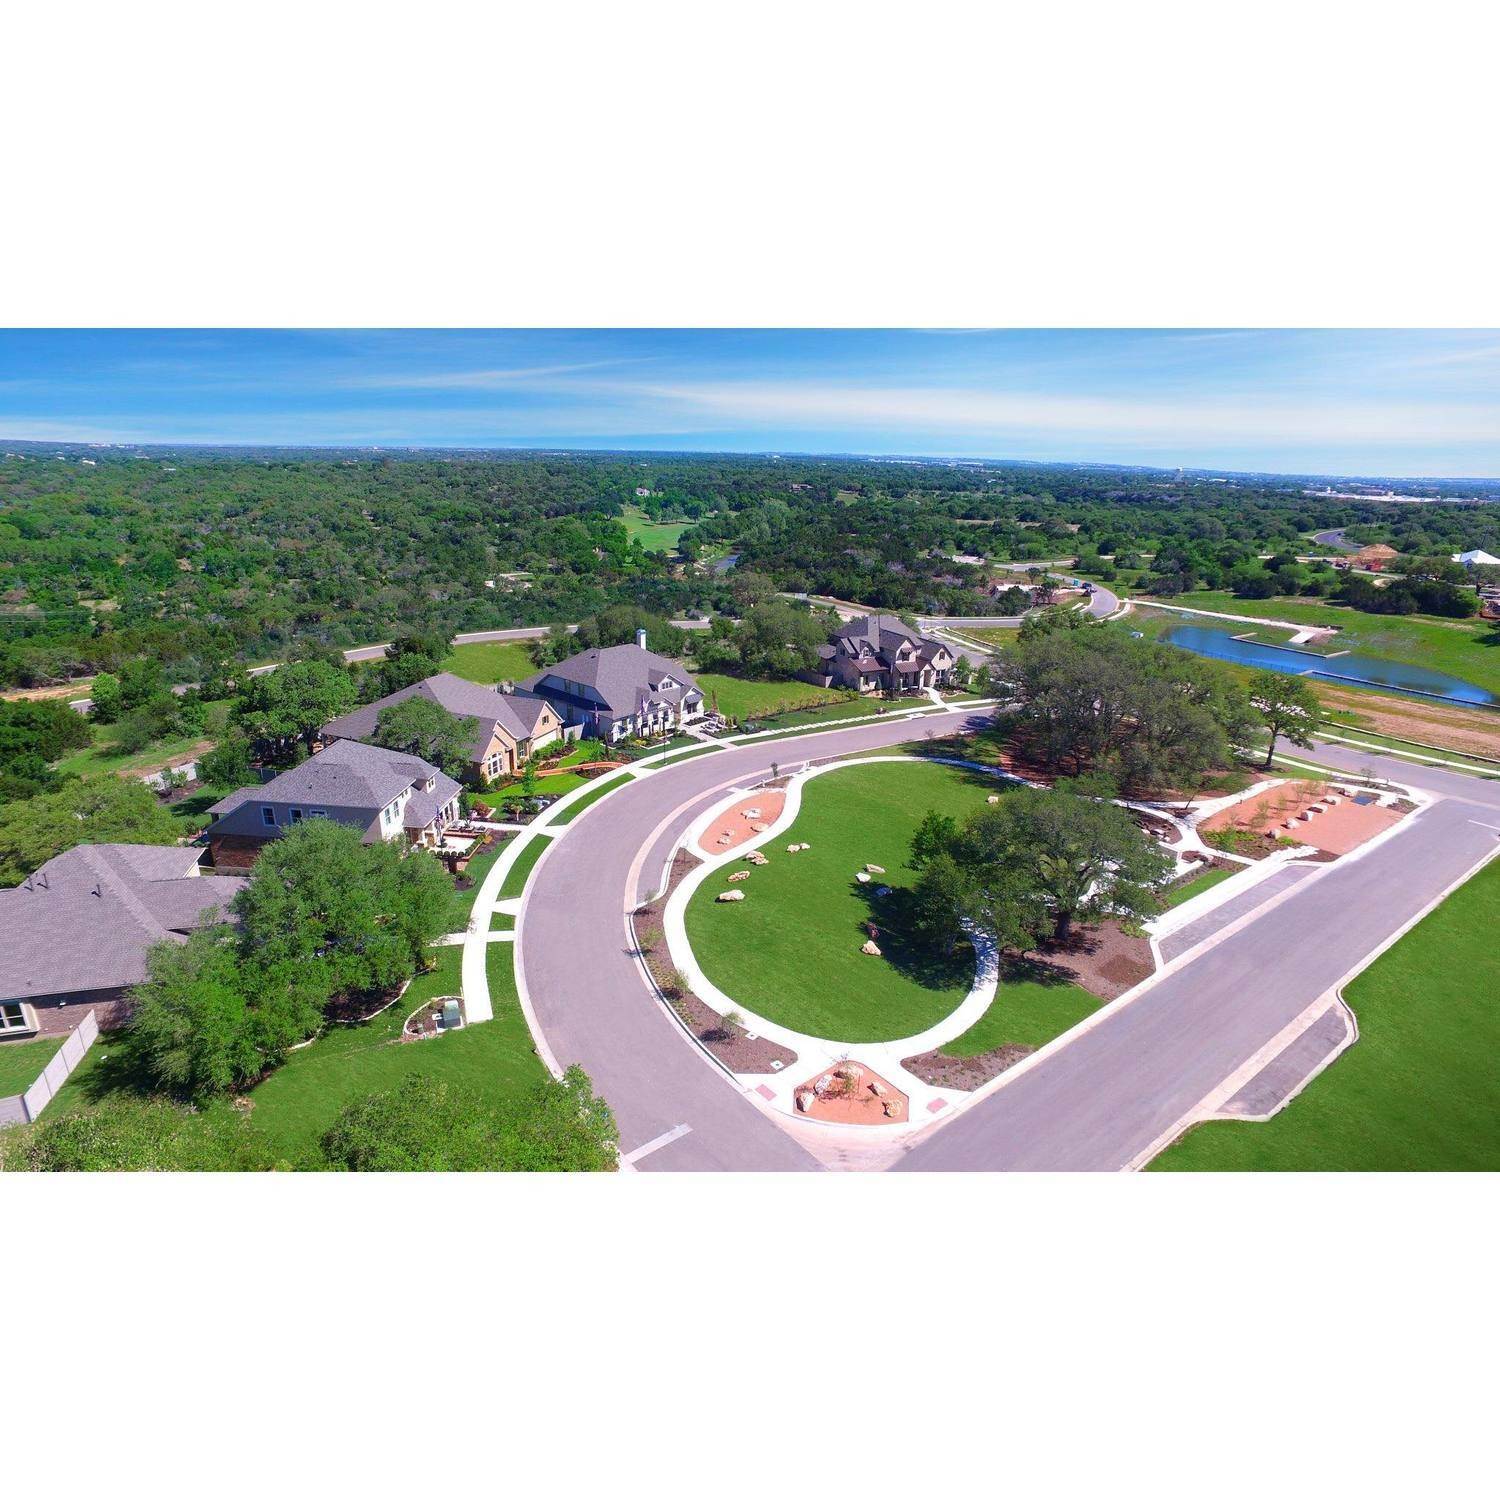 17. Wolf Ranch 51' building at 109 Blackberry Cove, Georgetown, TX 78633